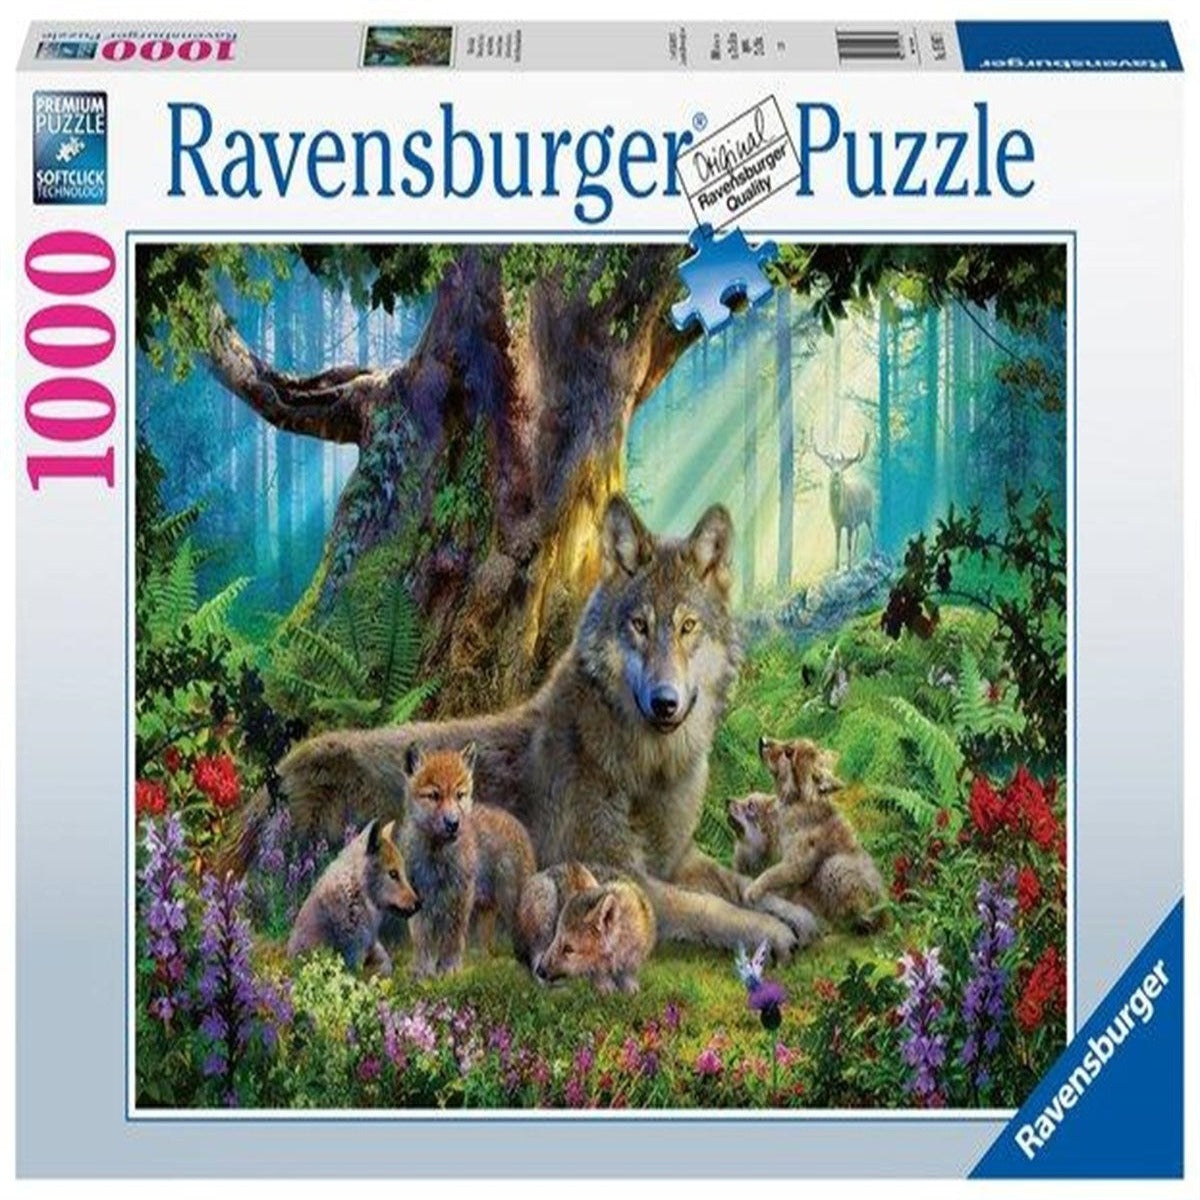 Ravensburger 1000 Parça Puzzle Wolves in Forest 159871 | Toysall